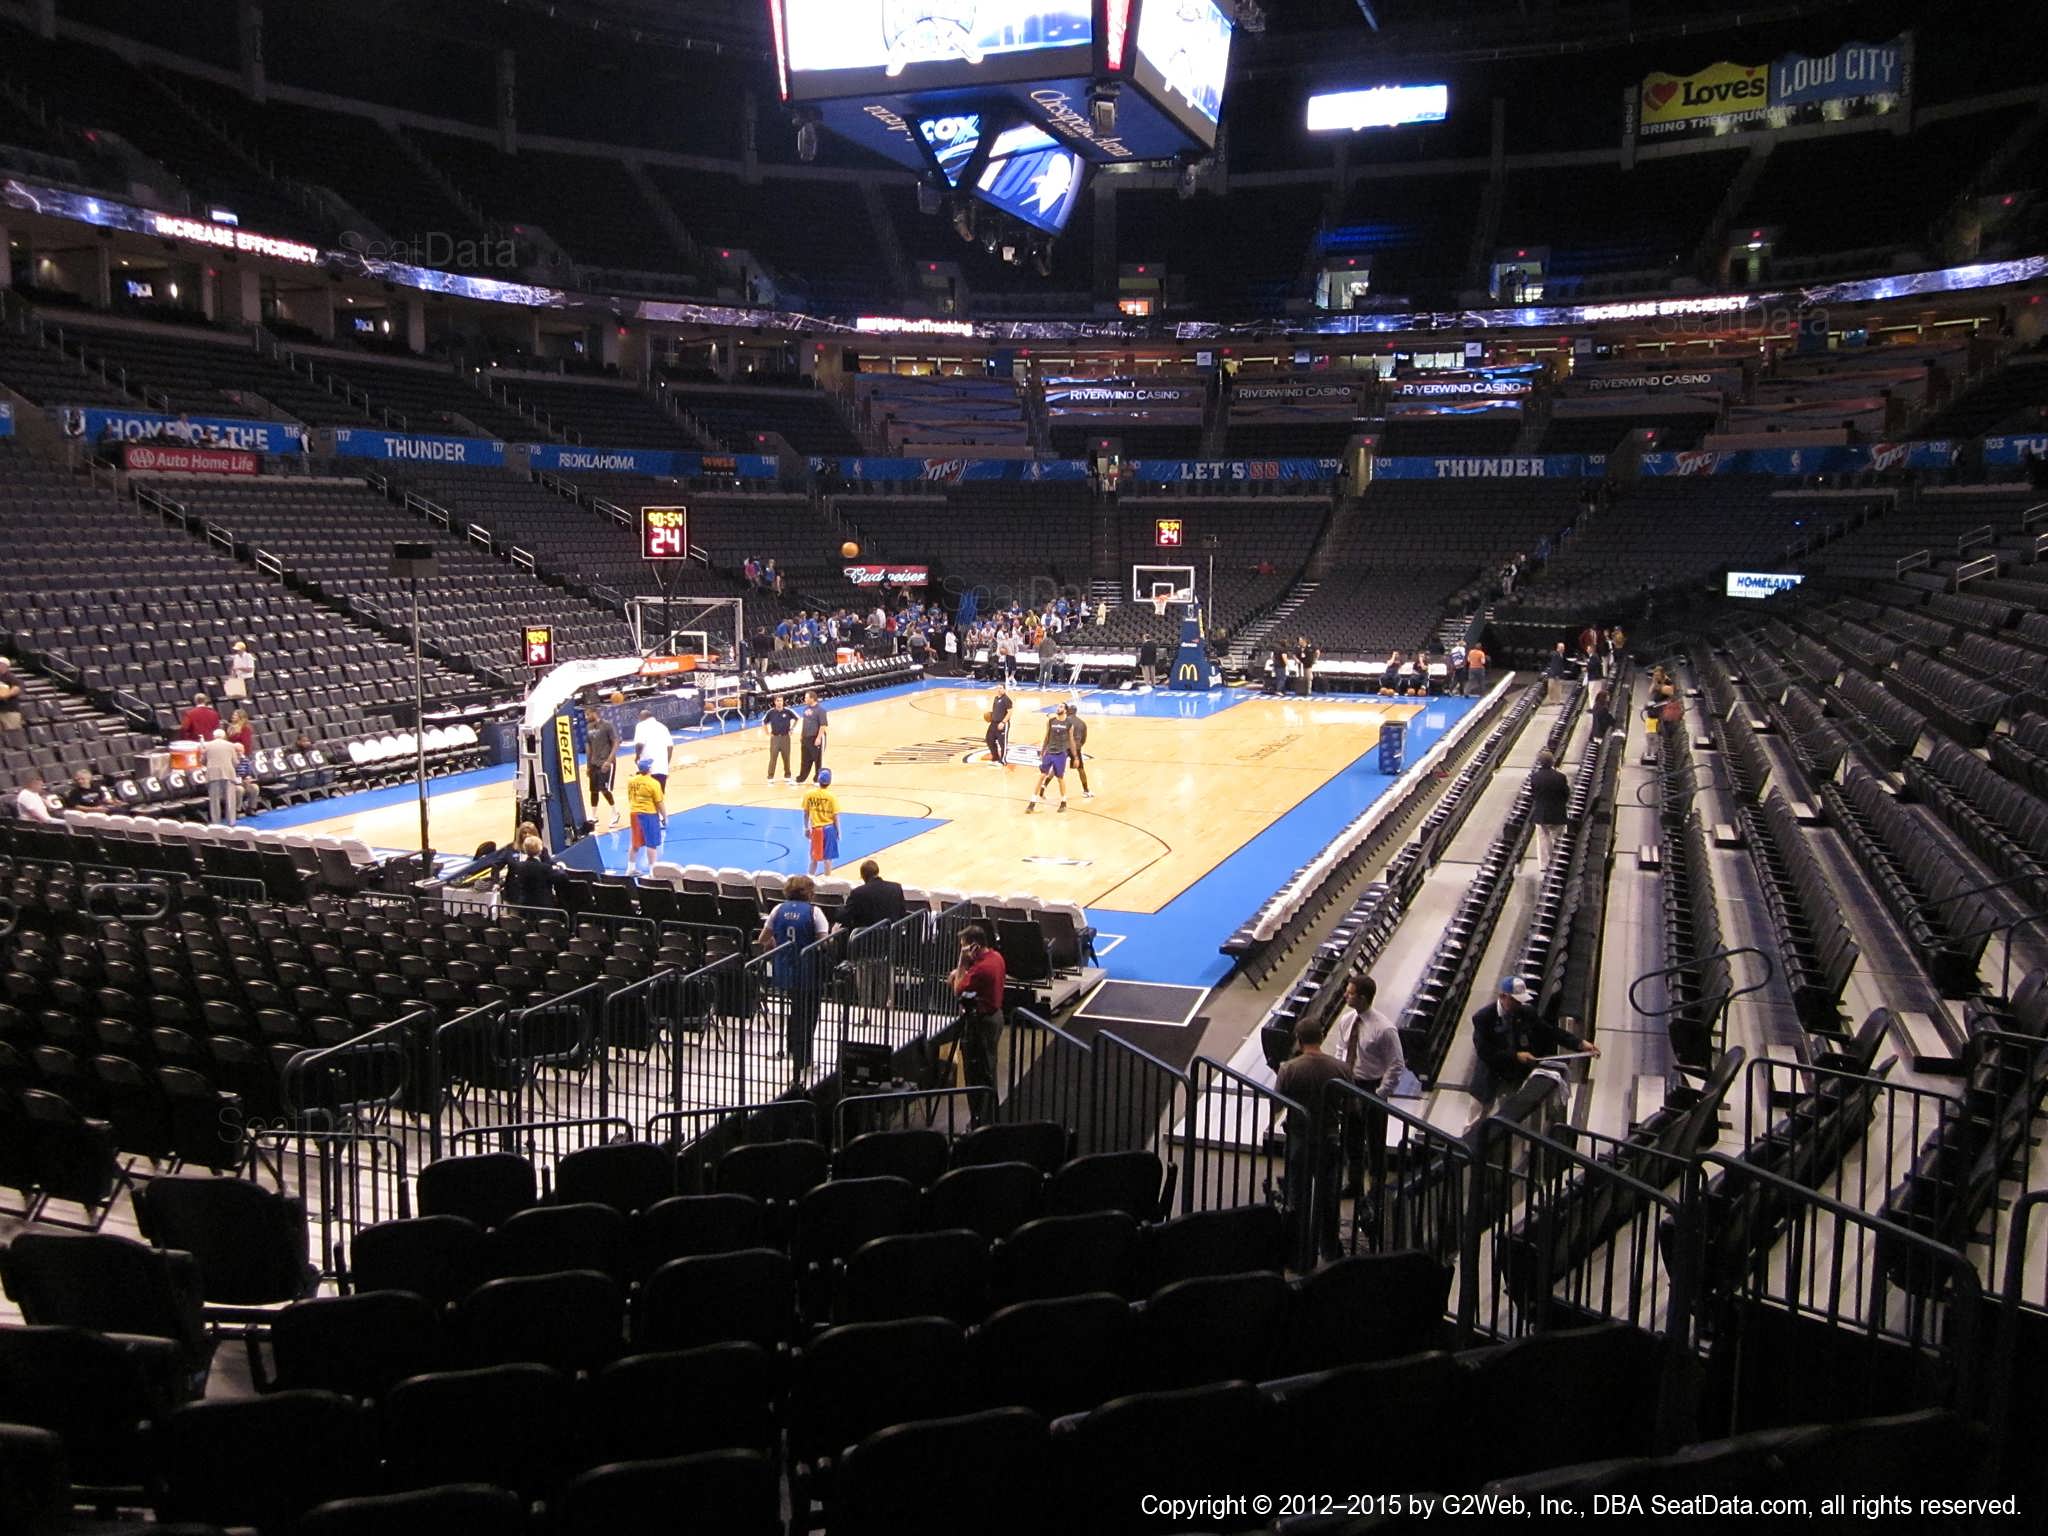 Seat view from section 109 at Chesapeake Energy Arena, home of the Oklahoma City Thunder